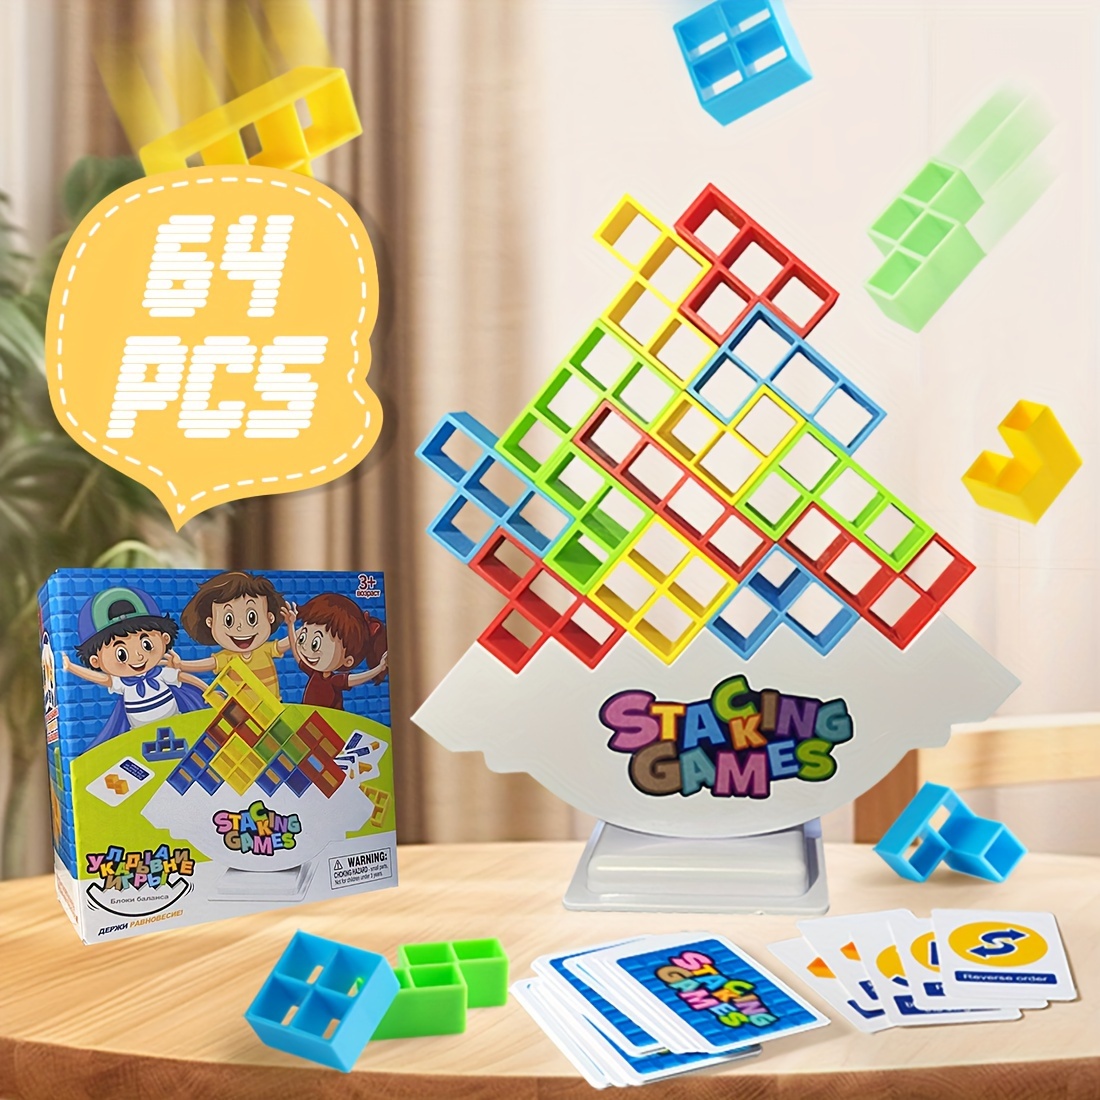 

64pcs Balanced Building Block Toys, (upgraded With Thicker Packaging And Larger Game Cards), Adult Board Game, Perfect For Family Party